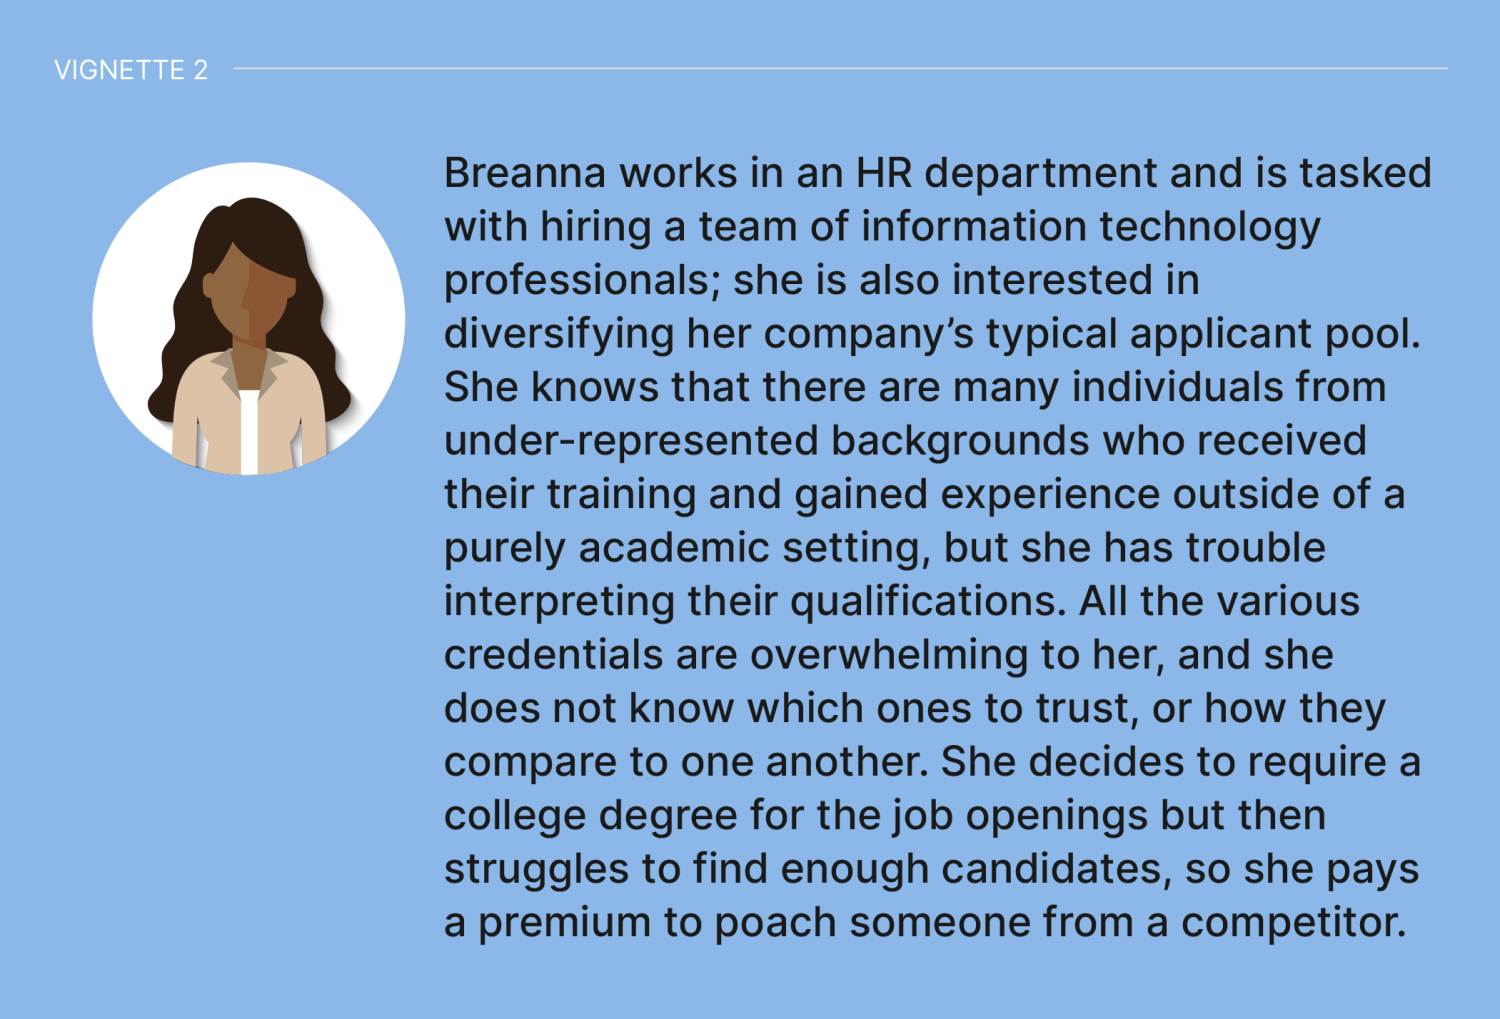 Vignette 2: Breanna works in an HR department and is tasked with hiring a team of information technology professionals; she is also interested in diversifying her company’s typical applicant pool. She knows that there are many individuals from under-represented backgrounds who received their training and gained experience outside of a purely academic setting, but she has trouble interpreting their qualifications. All the various credentials are overwhelming to her, and she does not know which ones to trust, or how they compare to one another. She decides to require a college degree for the job openings but then struggles to find enough candidates, so she pays a premium to poach someone from a competitor.